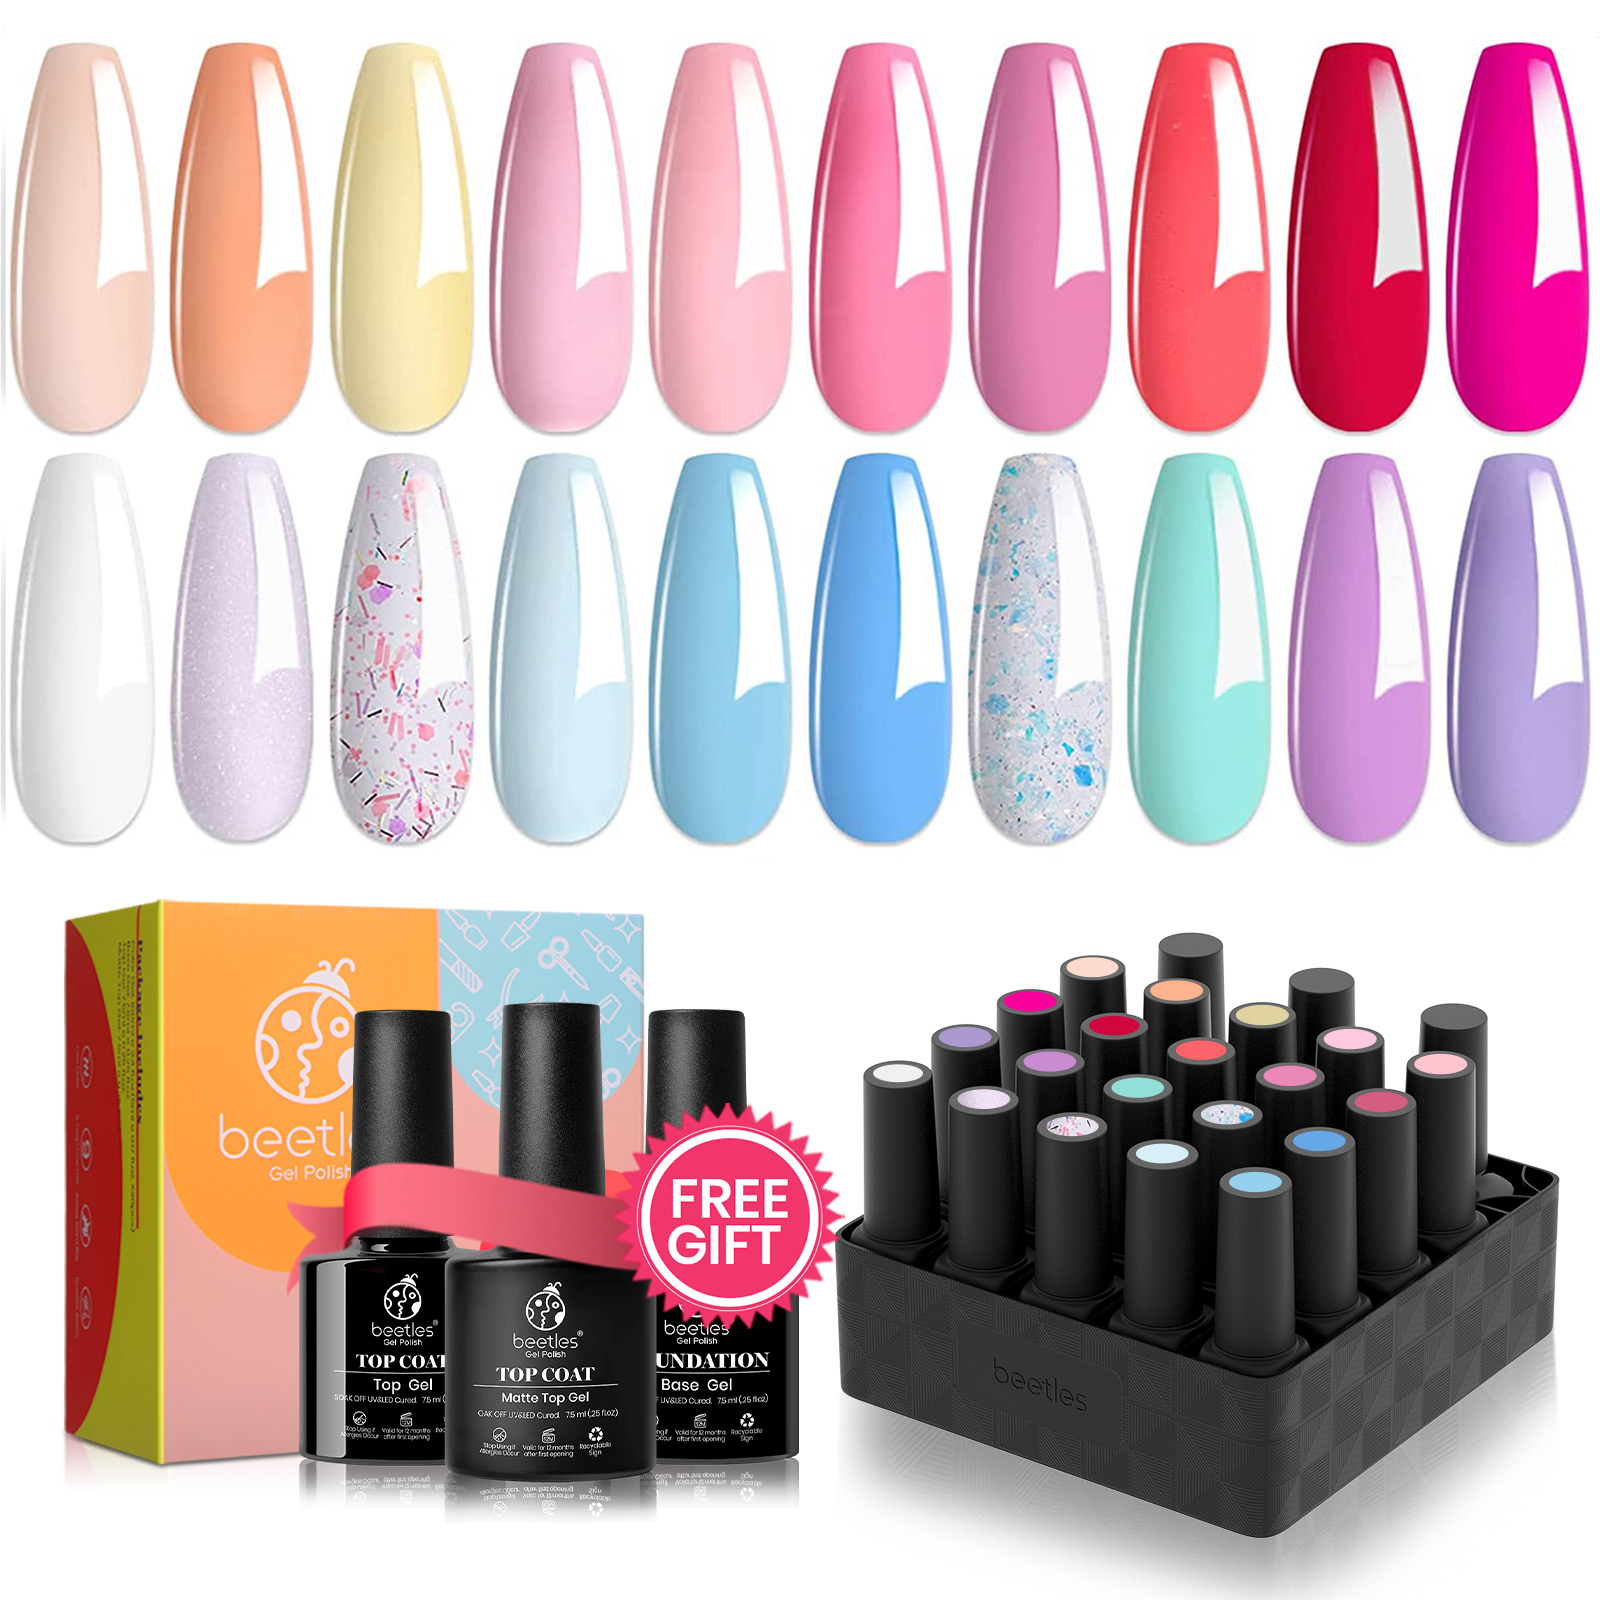 Awakening Alice - 20 Gel Colors Set with Top and Base Coat (5ml/Each)